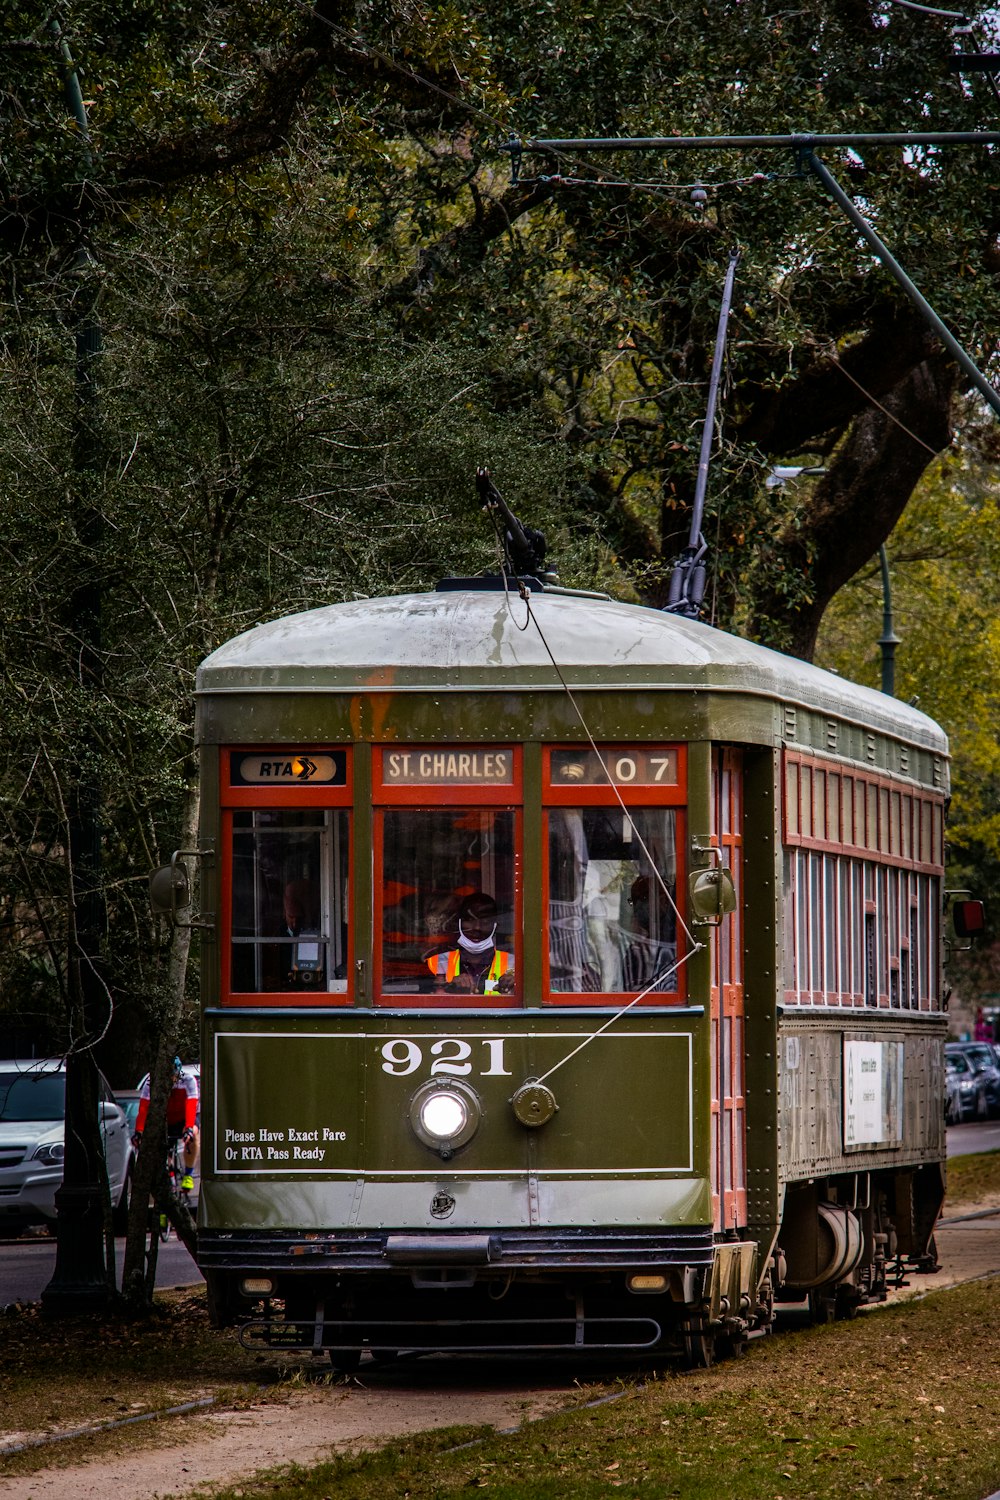 a trolley car on the tracks in a city